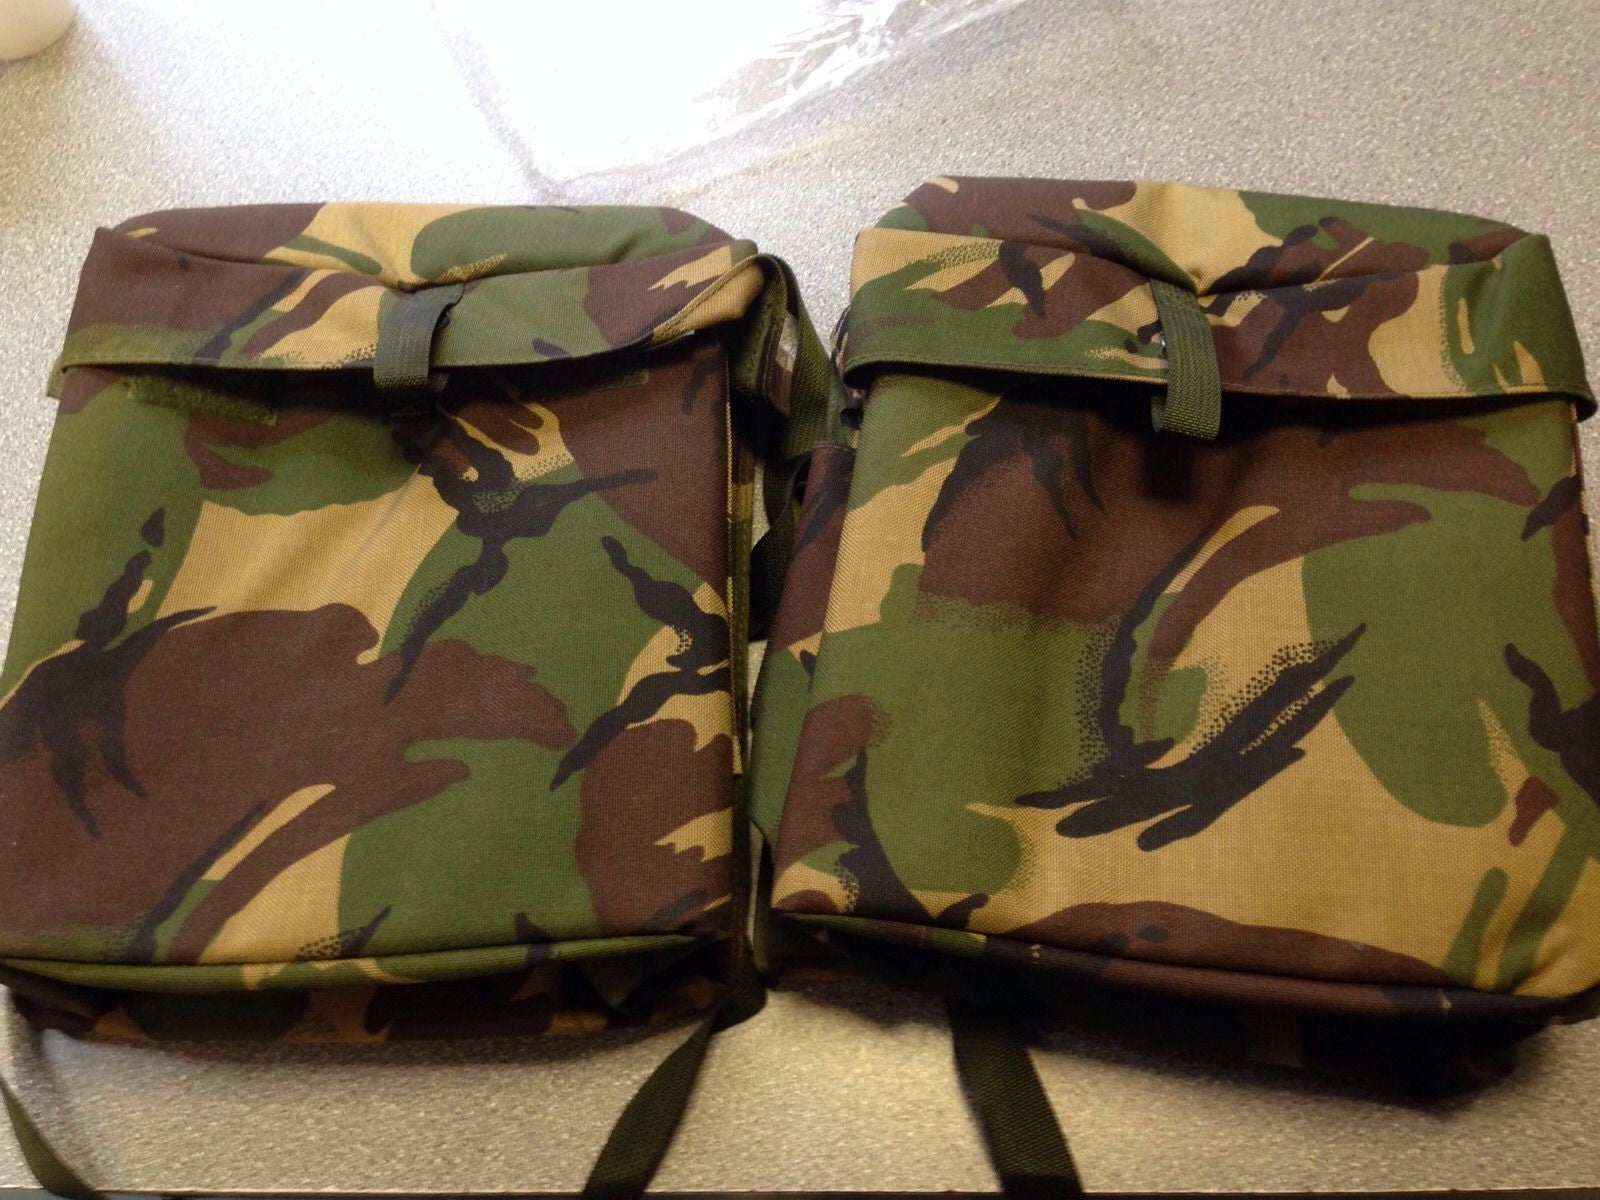 CAMOUFLAGE MOTORCYCLE PANNIERS - Silvermans
 - 1